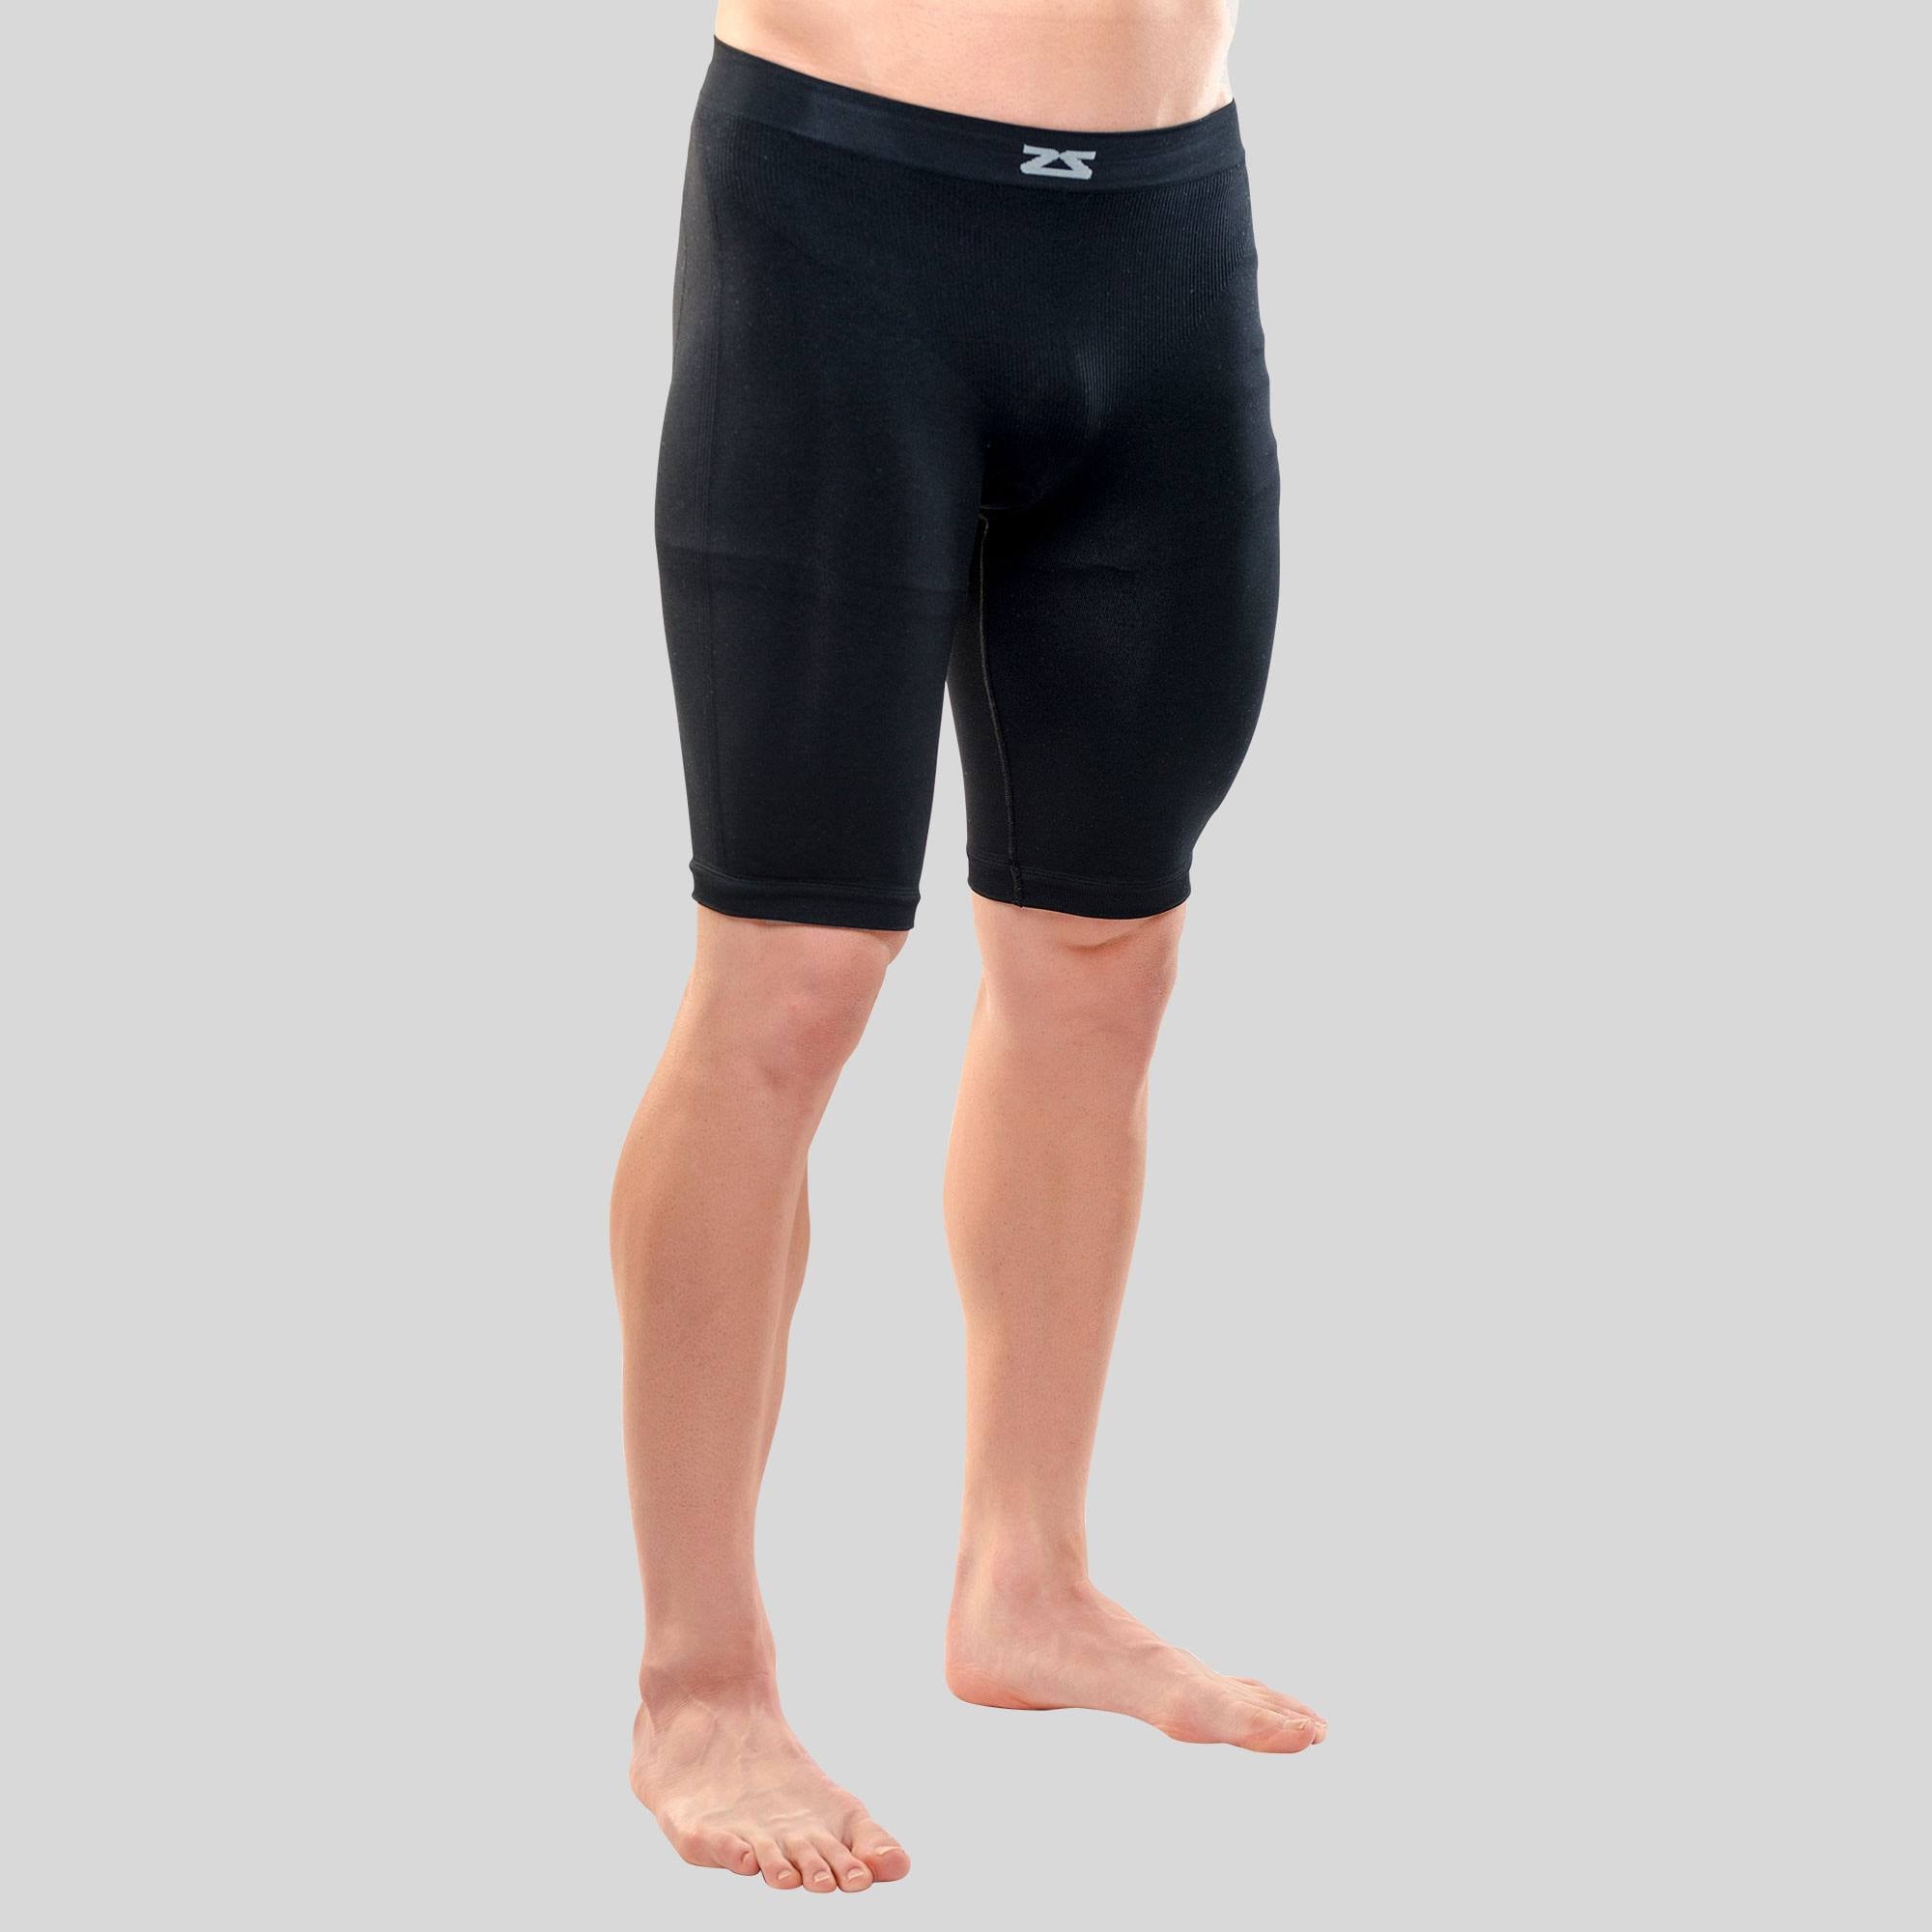 Compression shorts for men and women l